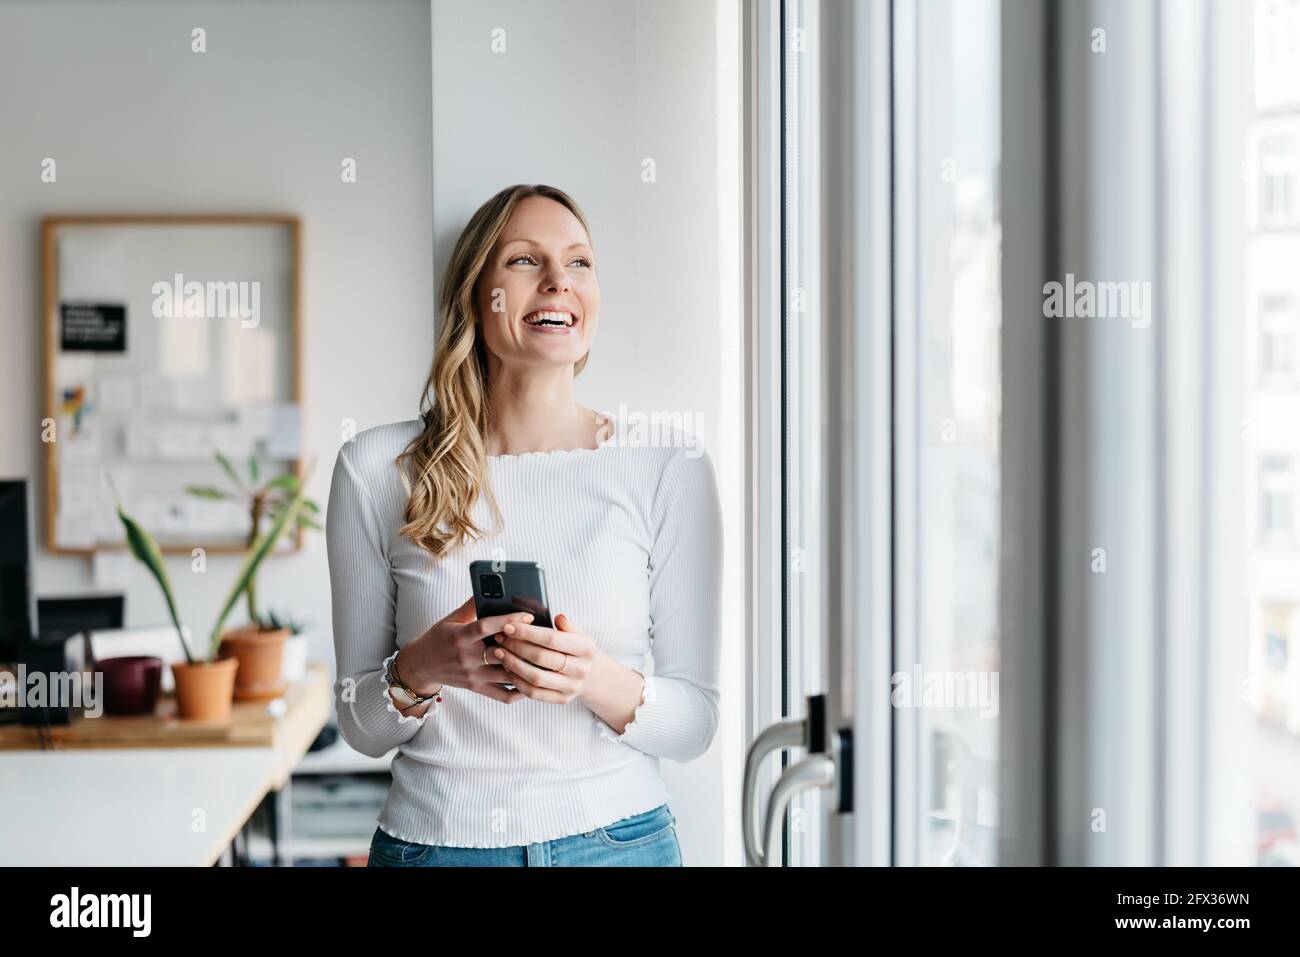 Young woman standing in the office looking out through a glass door with a beaming smile of pleasure as she holds her mobile phone in her hands Stock Photo